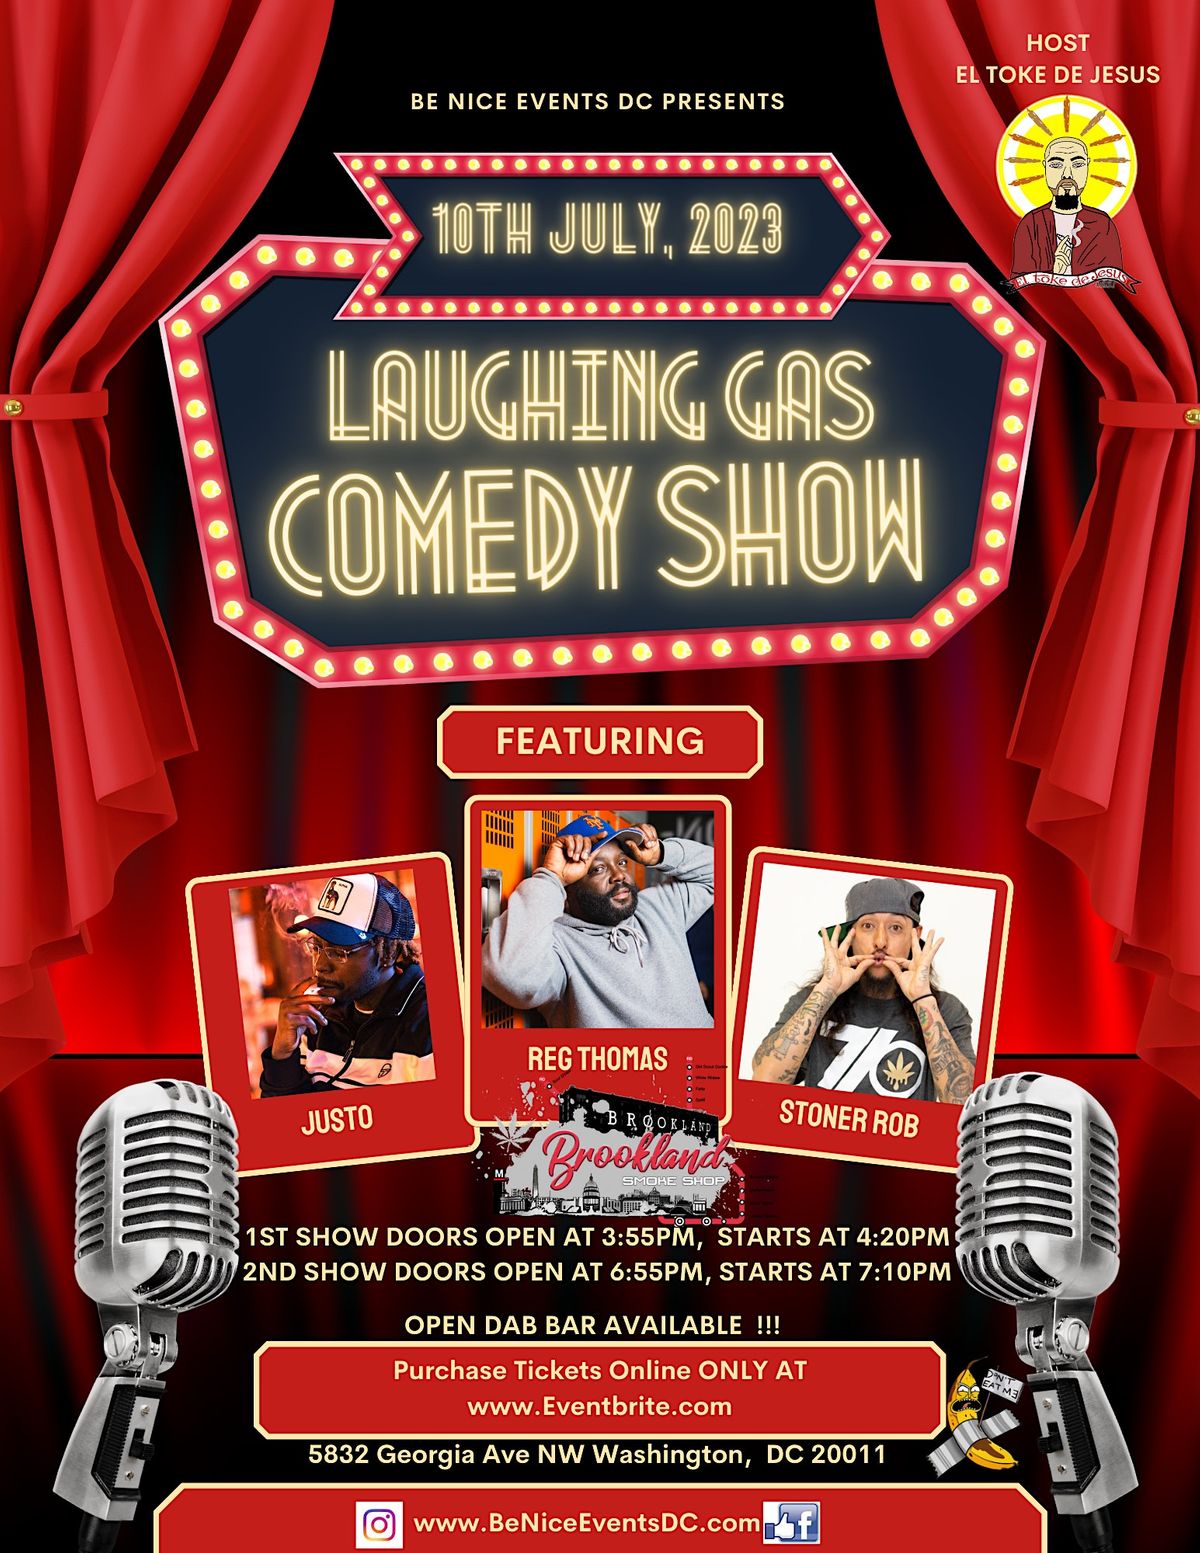 The Laughing Gas Comedy Show (2nd Show)